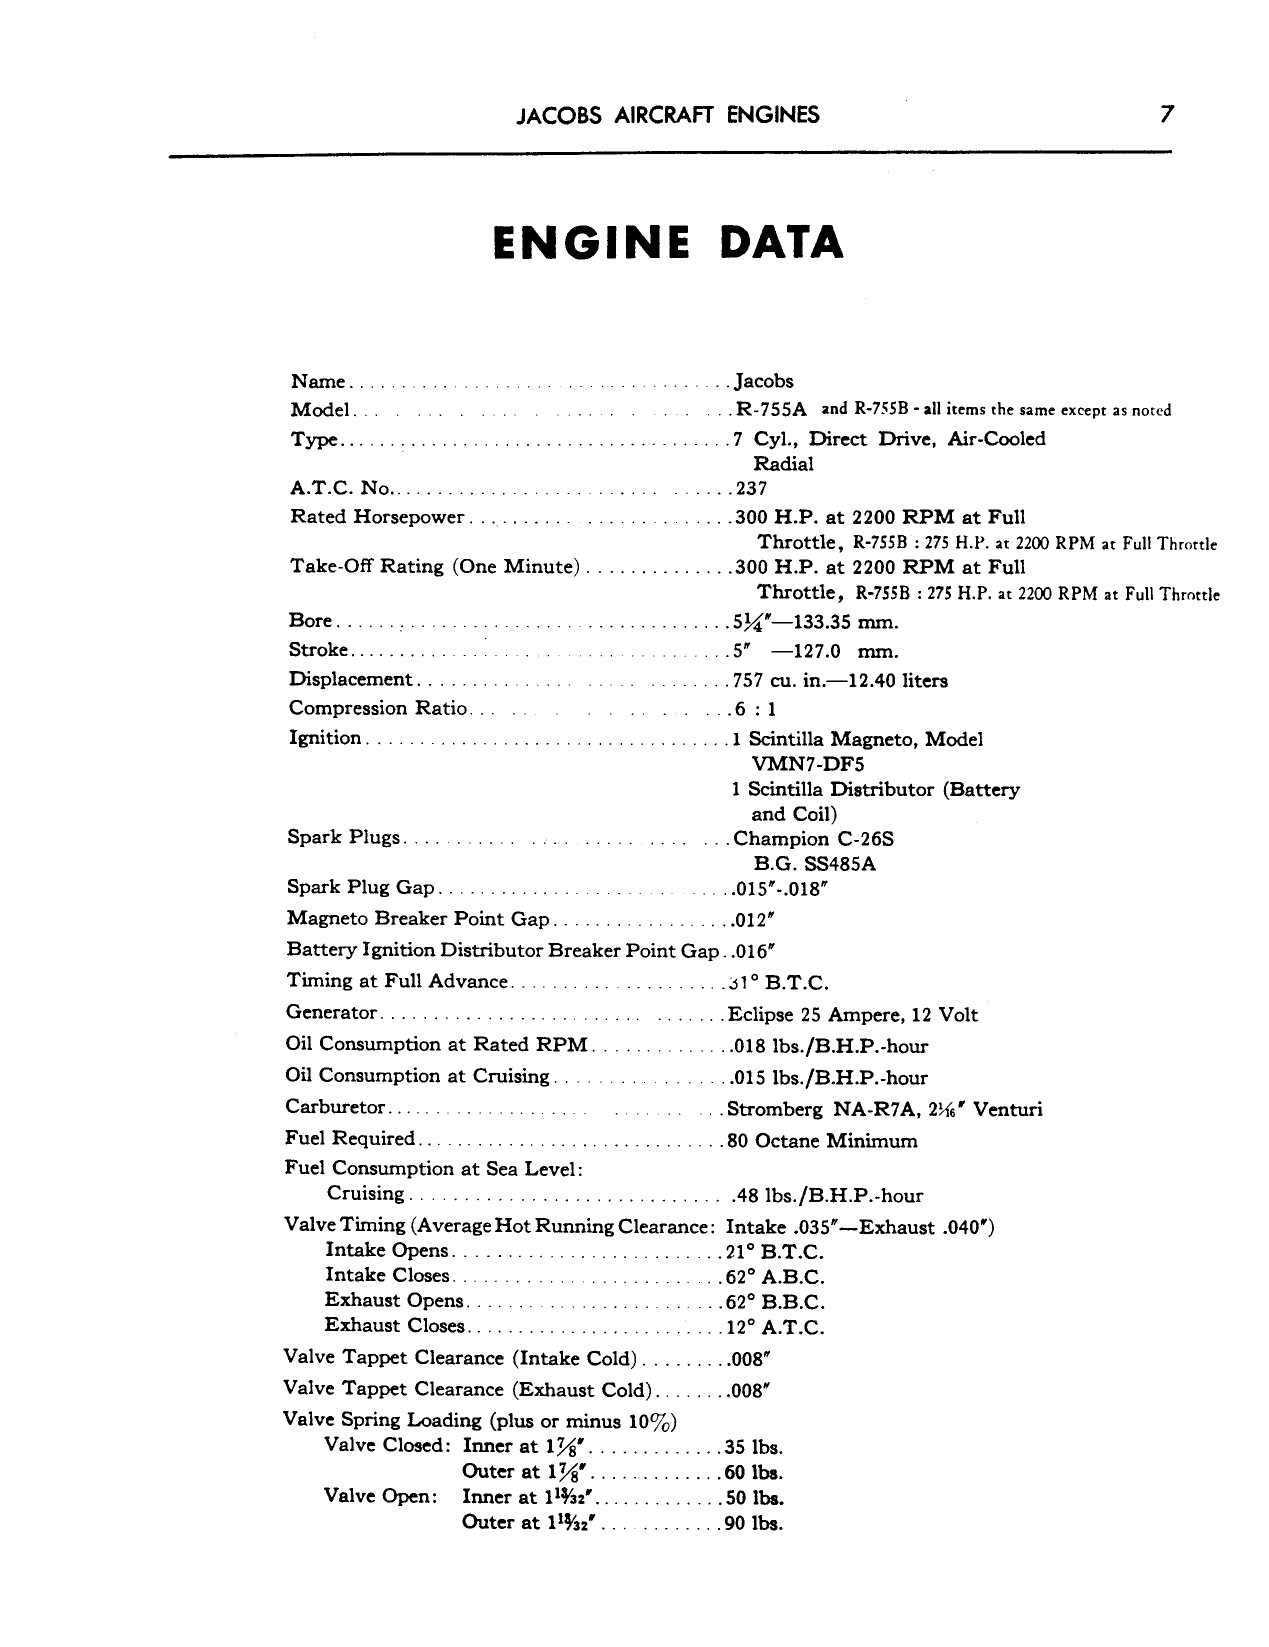 Sample page 7 from AirCorps Library document: Operators Manual for Jacobs Aircraft Engine Models R-755A and R-755B